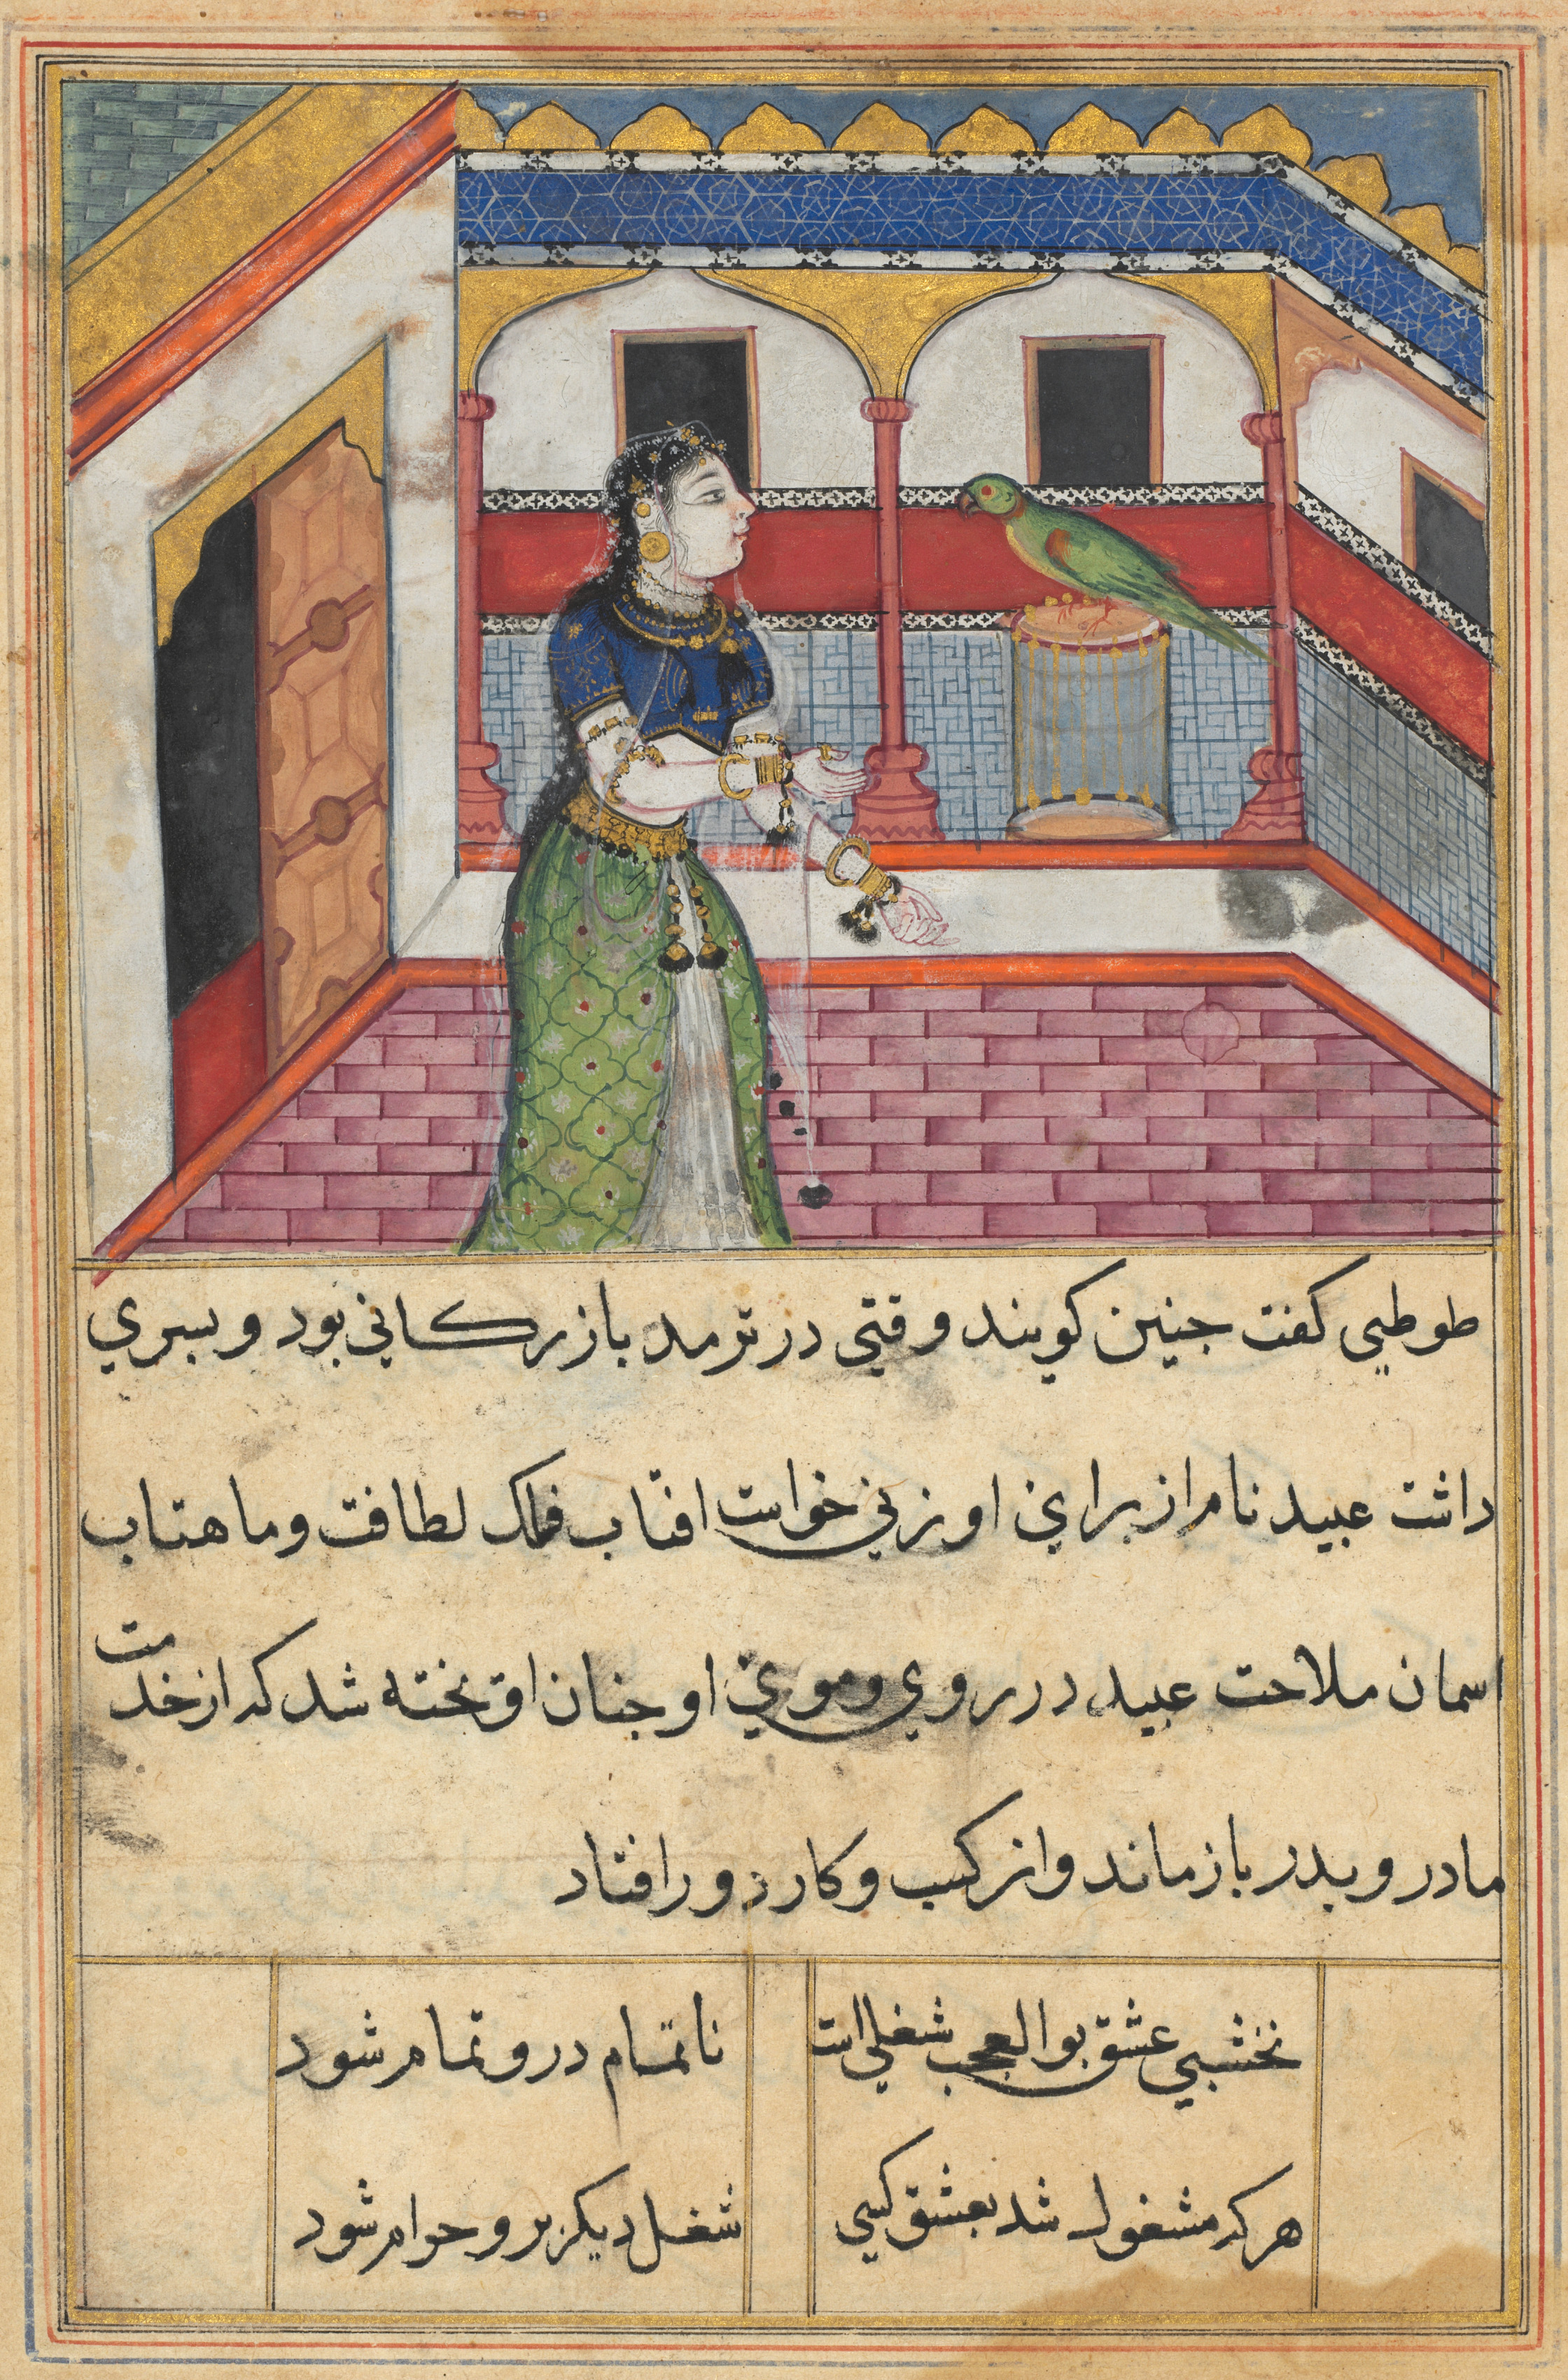 The parrot addresses Khujasta at the beginning of the forty-second night, from a Tuti-nama (Tales of a Parrot)